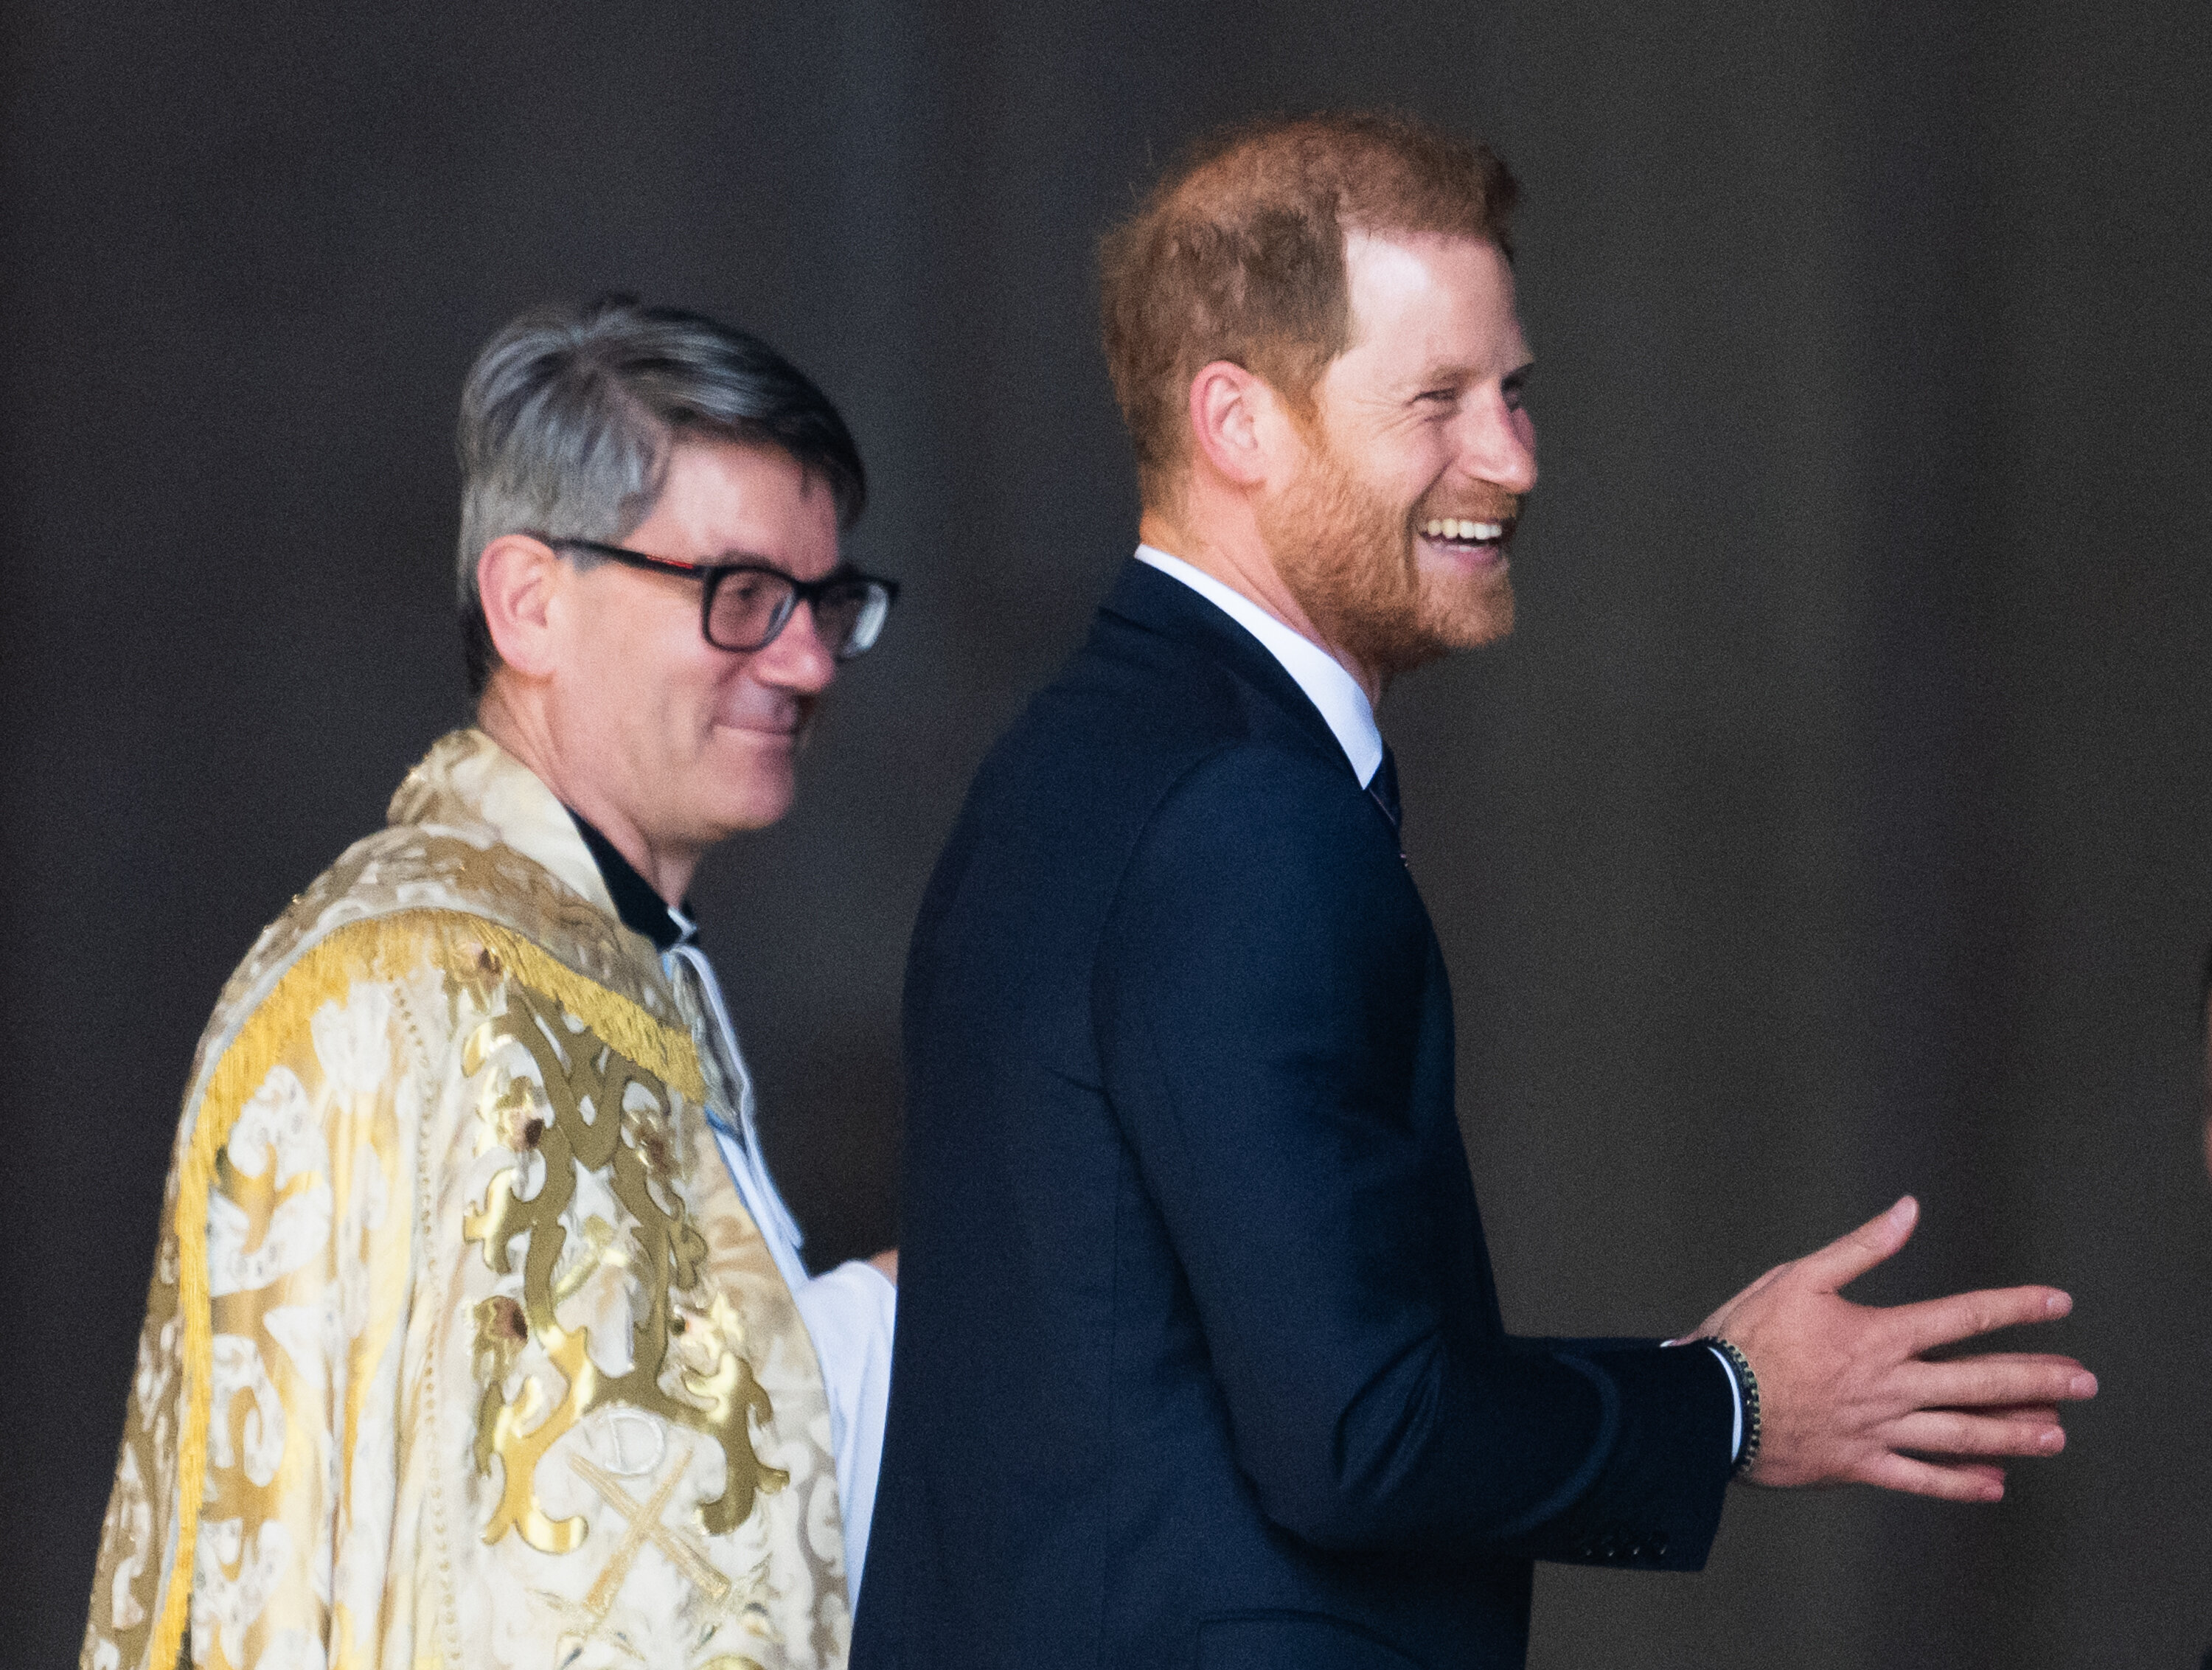 Prince Harry in a dark suit smiling and walking beside a person in ceremonial robes